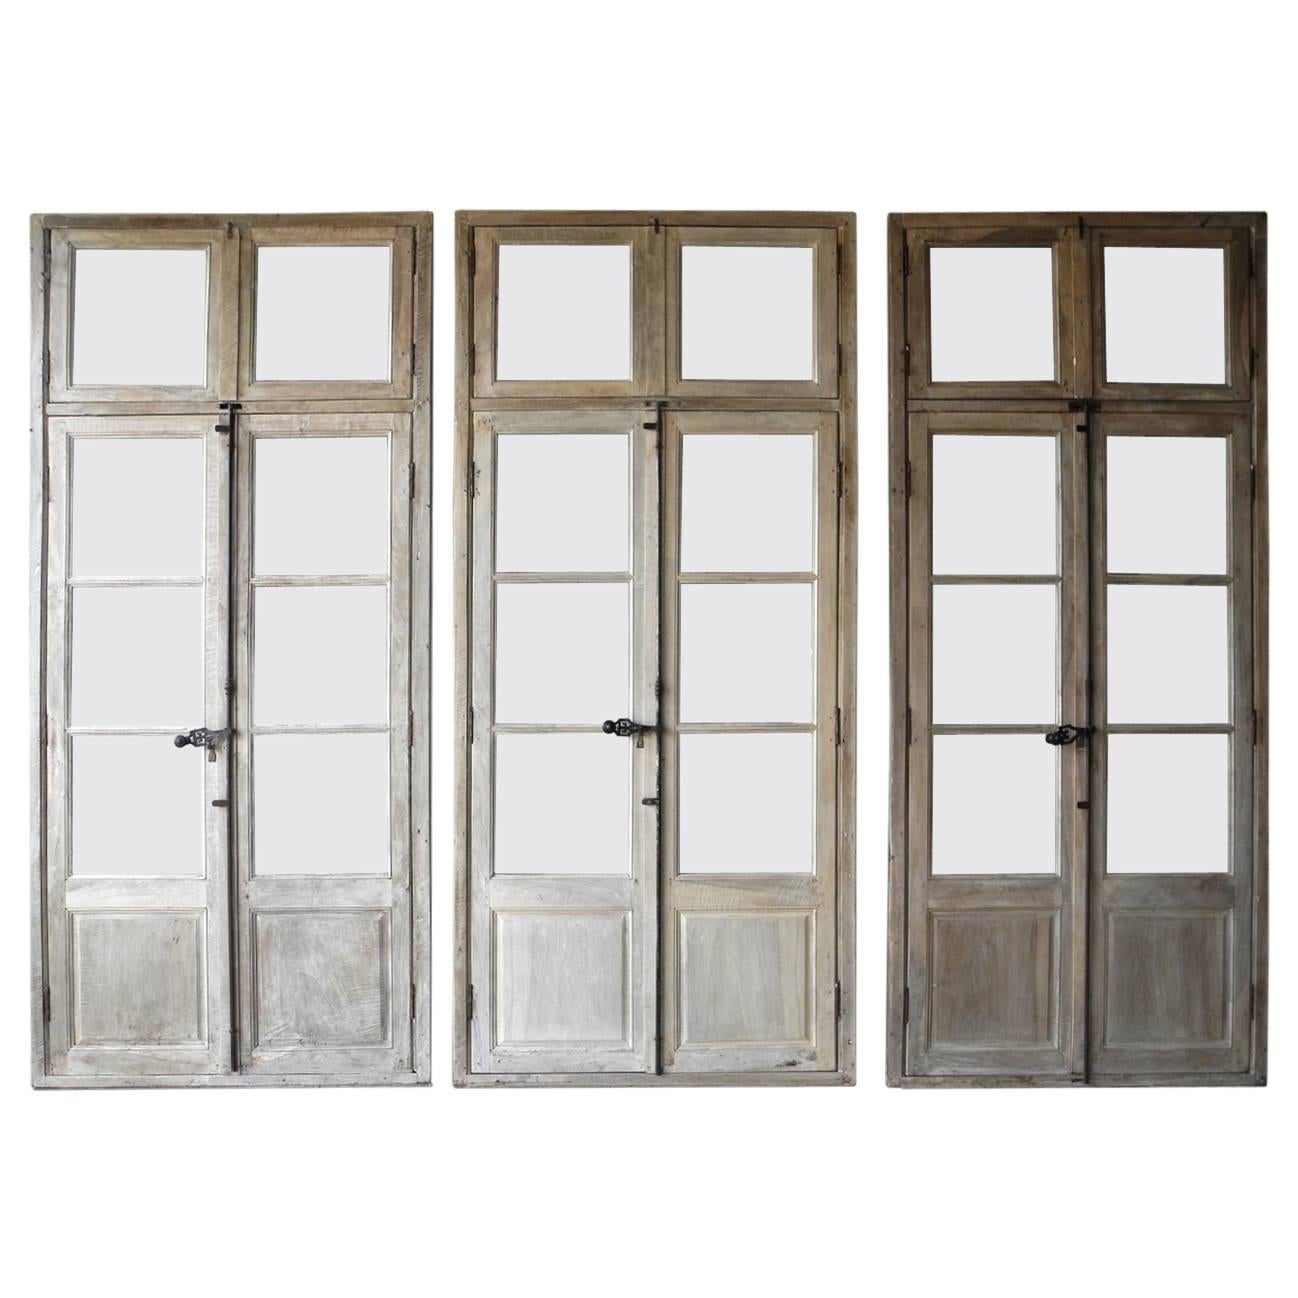 Antique, Reclaimed Large Wooden Windows from Sisteron with Natural Wood Finish